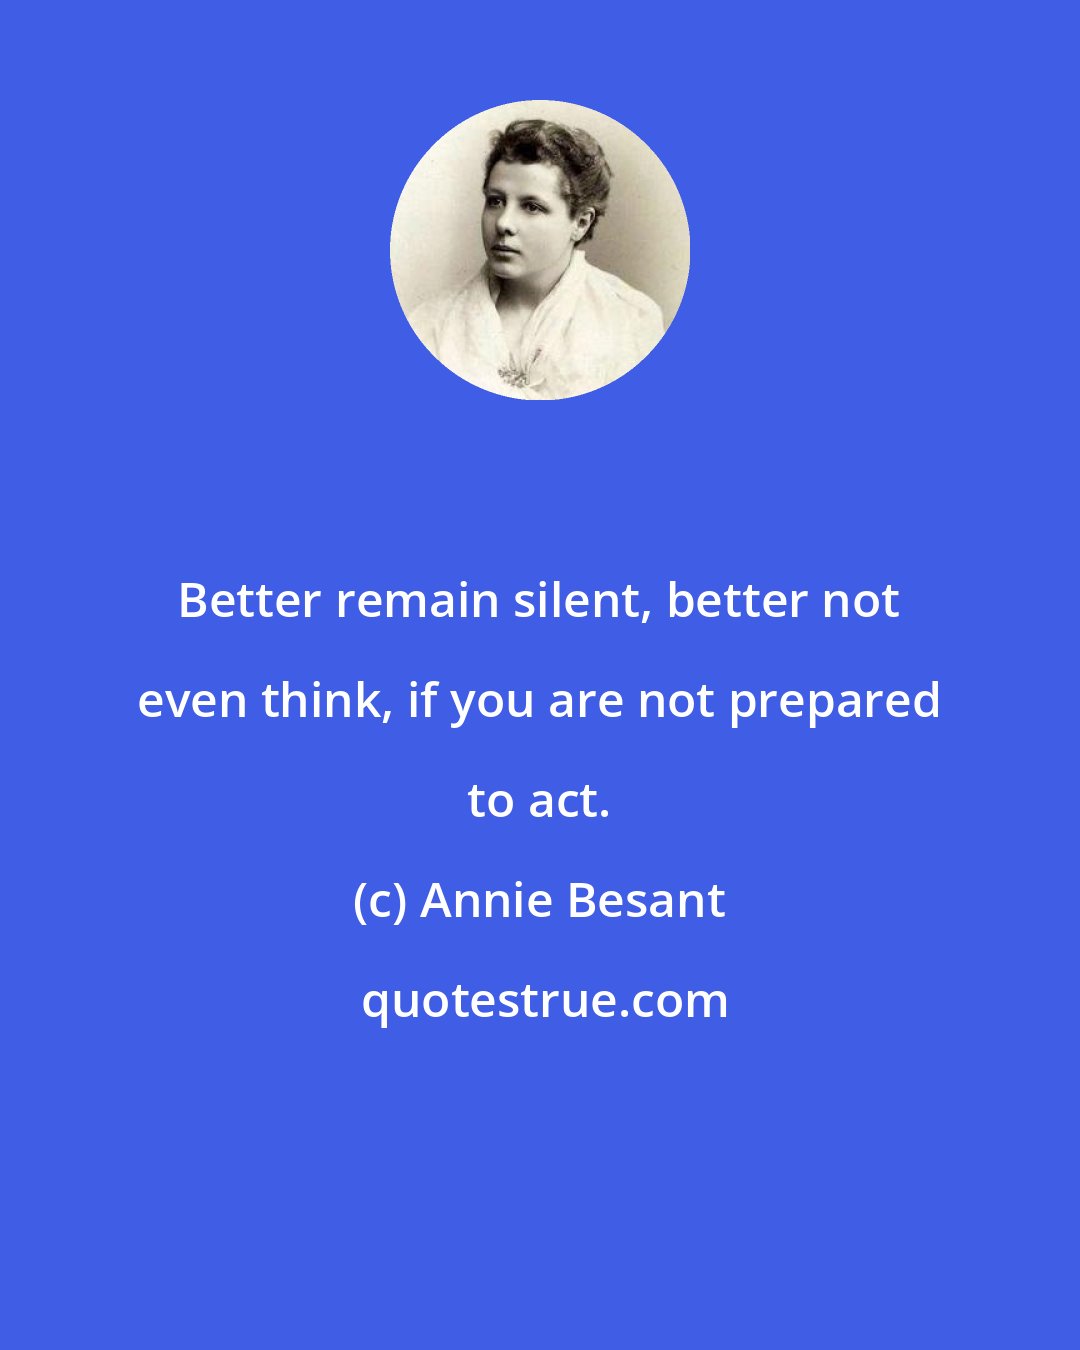 Annie Besant: Better remain silent, better not even think, if you are not prepared to act.